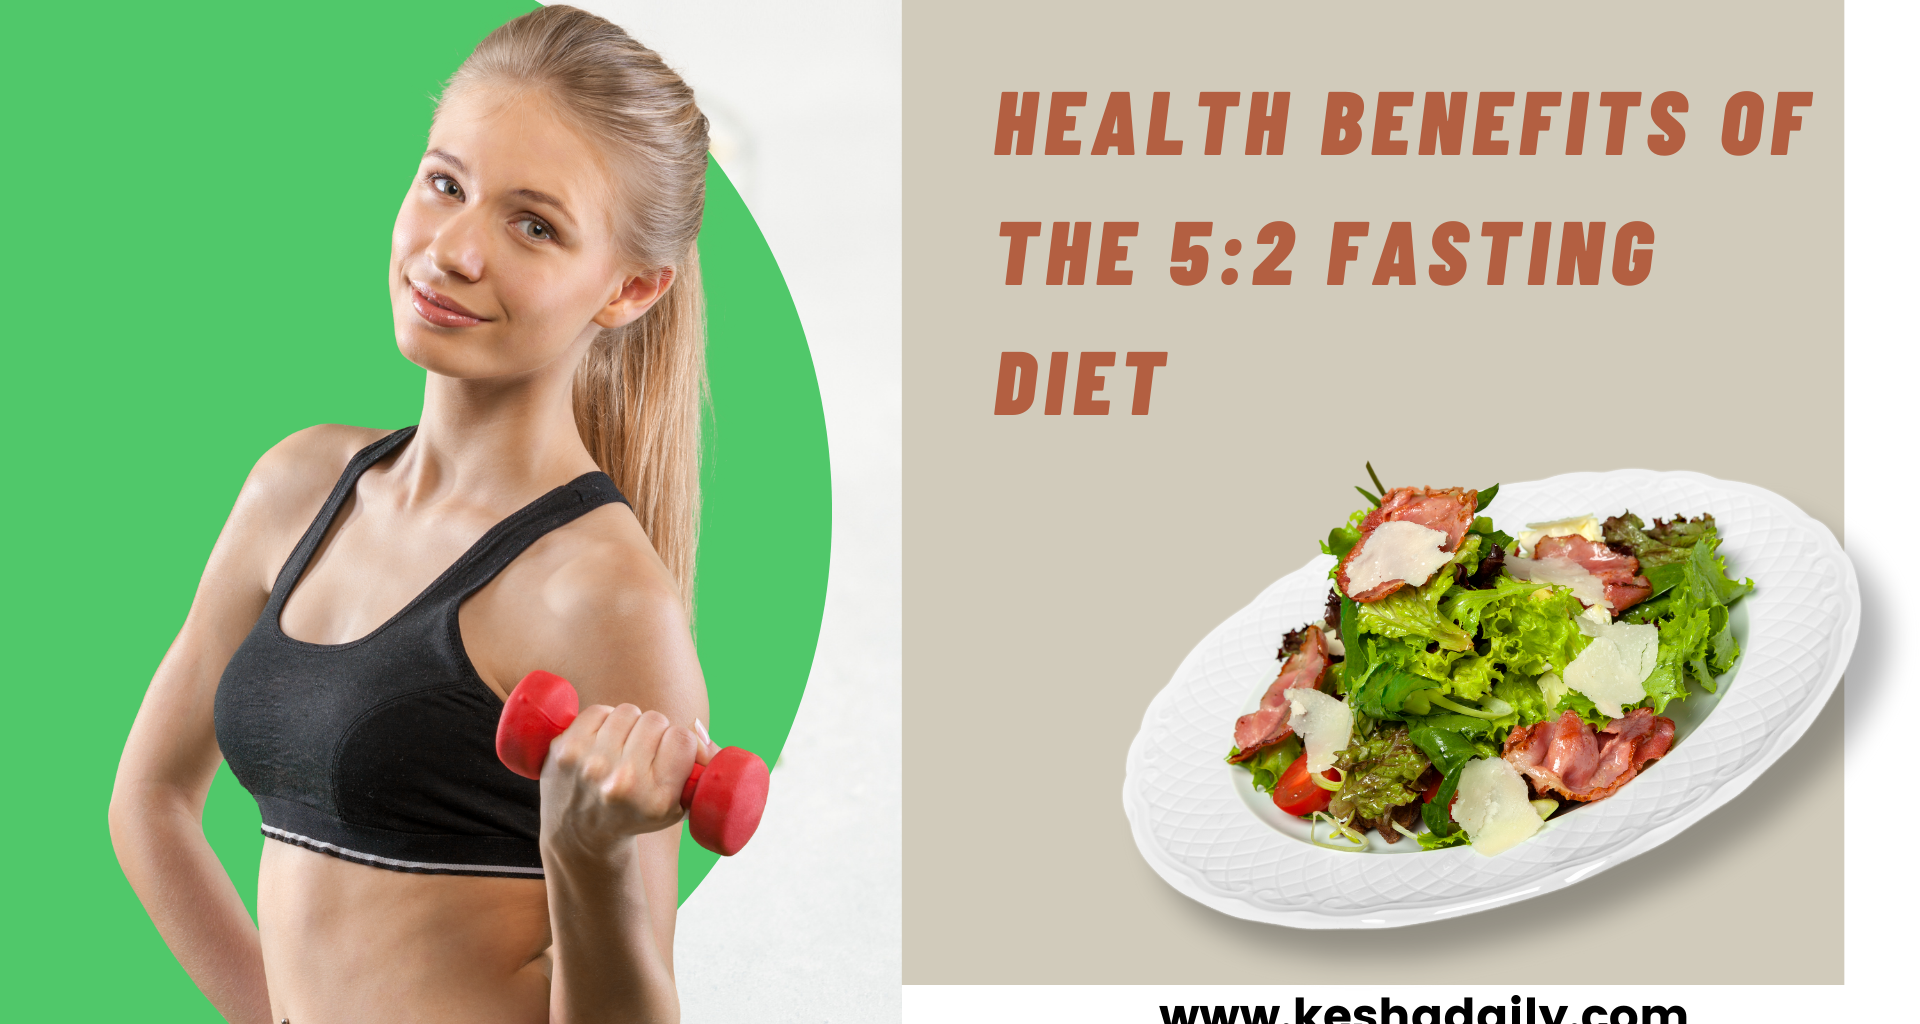 Pros and Cons of a 5:2 Fasting Diet